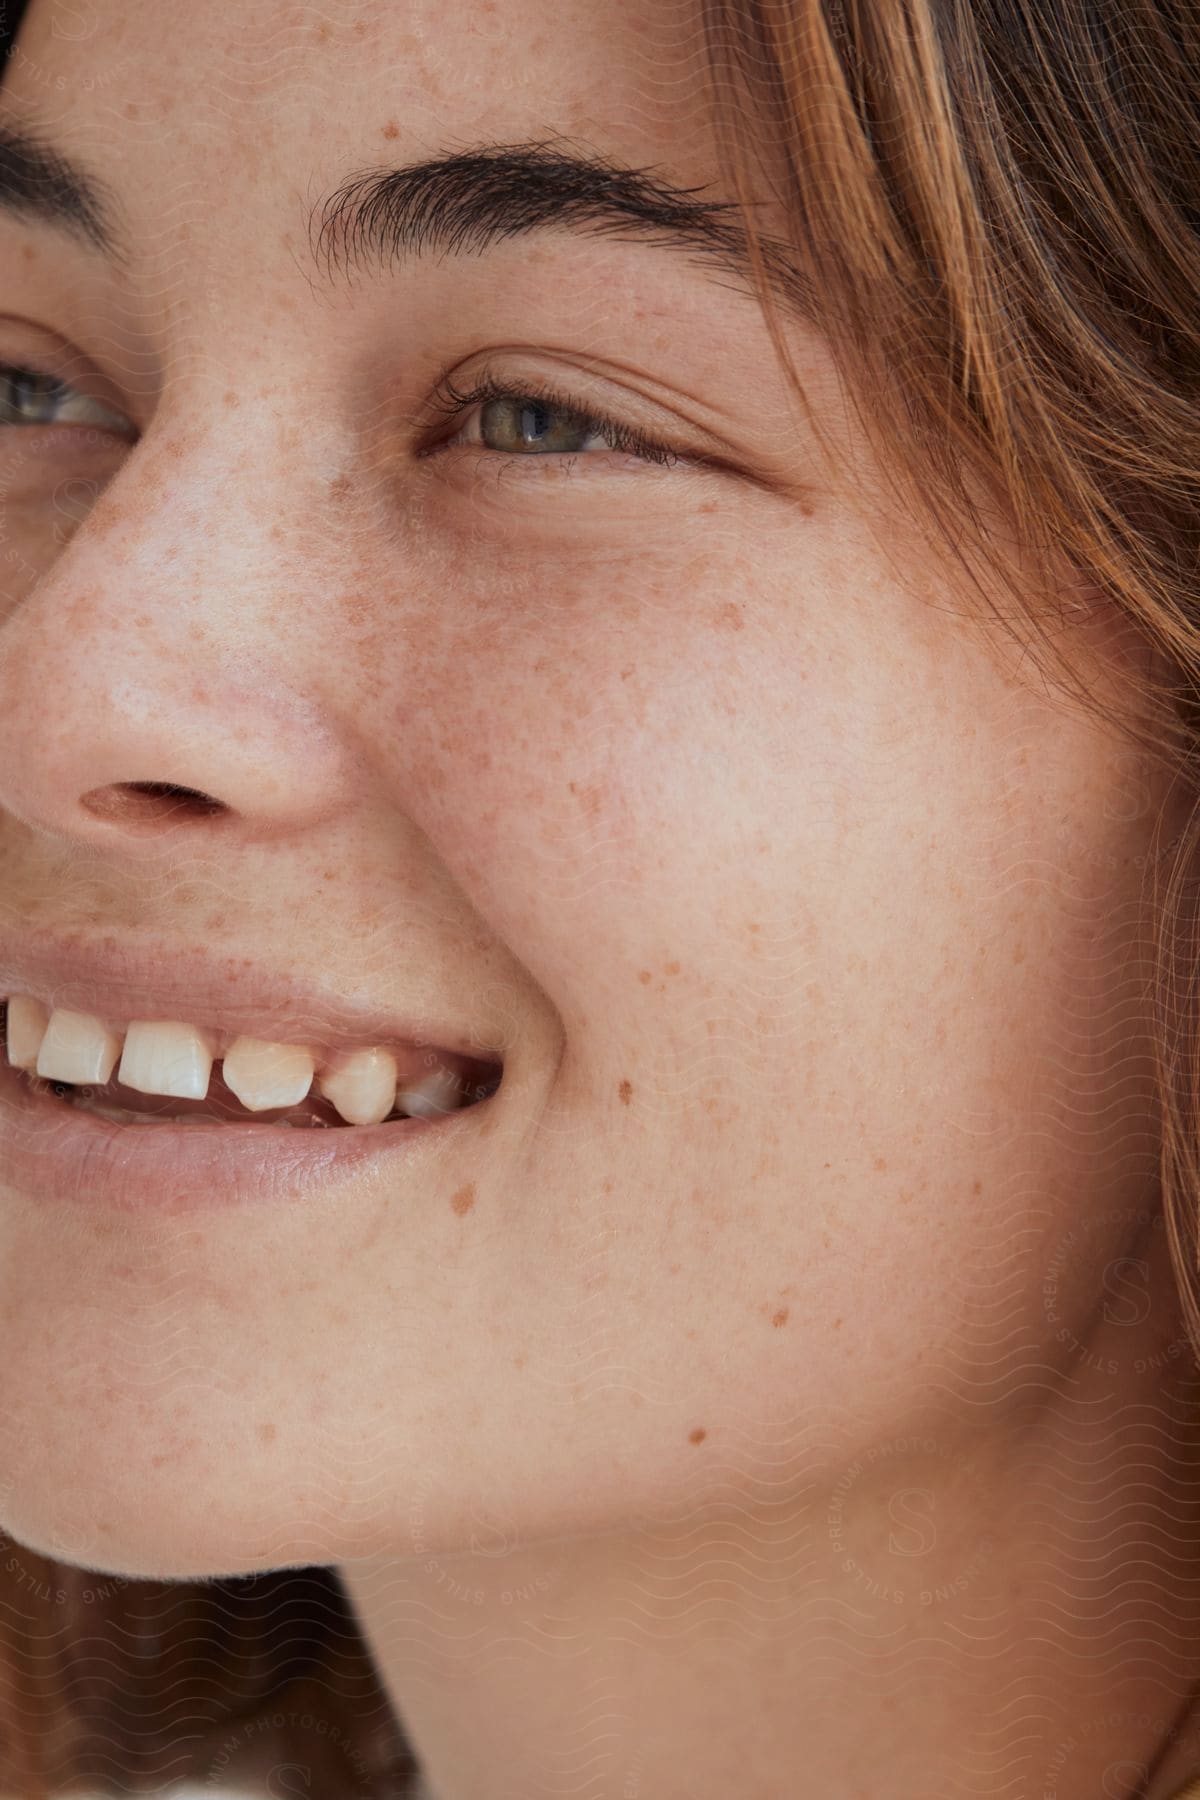 Portrait of a young woman with light-colored eyes, freckles on her face, and a smiling expression.